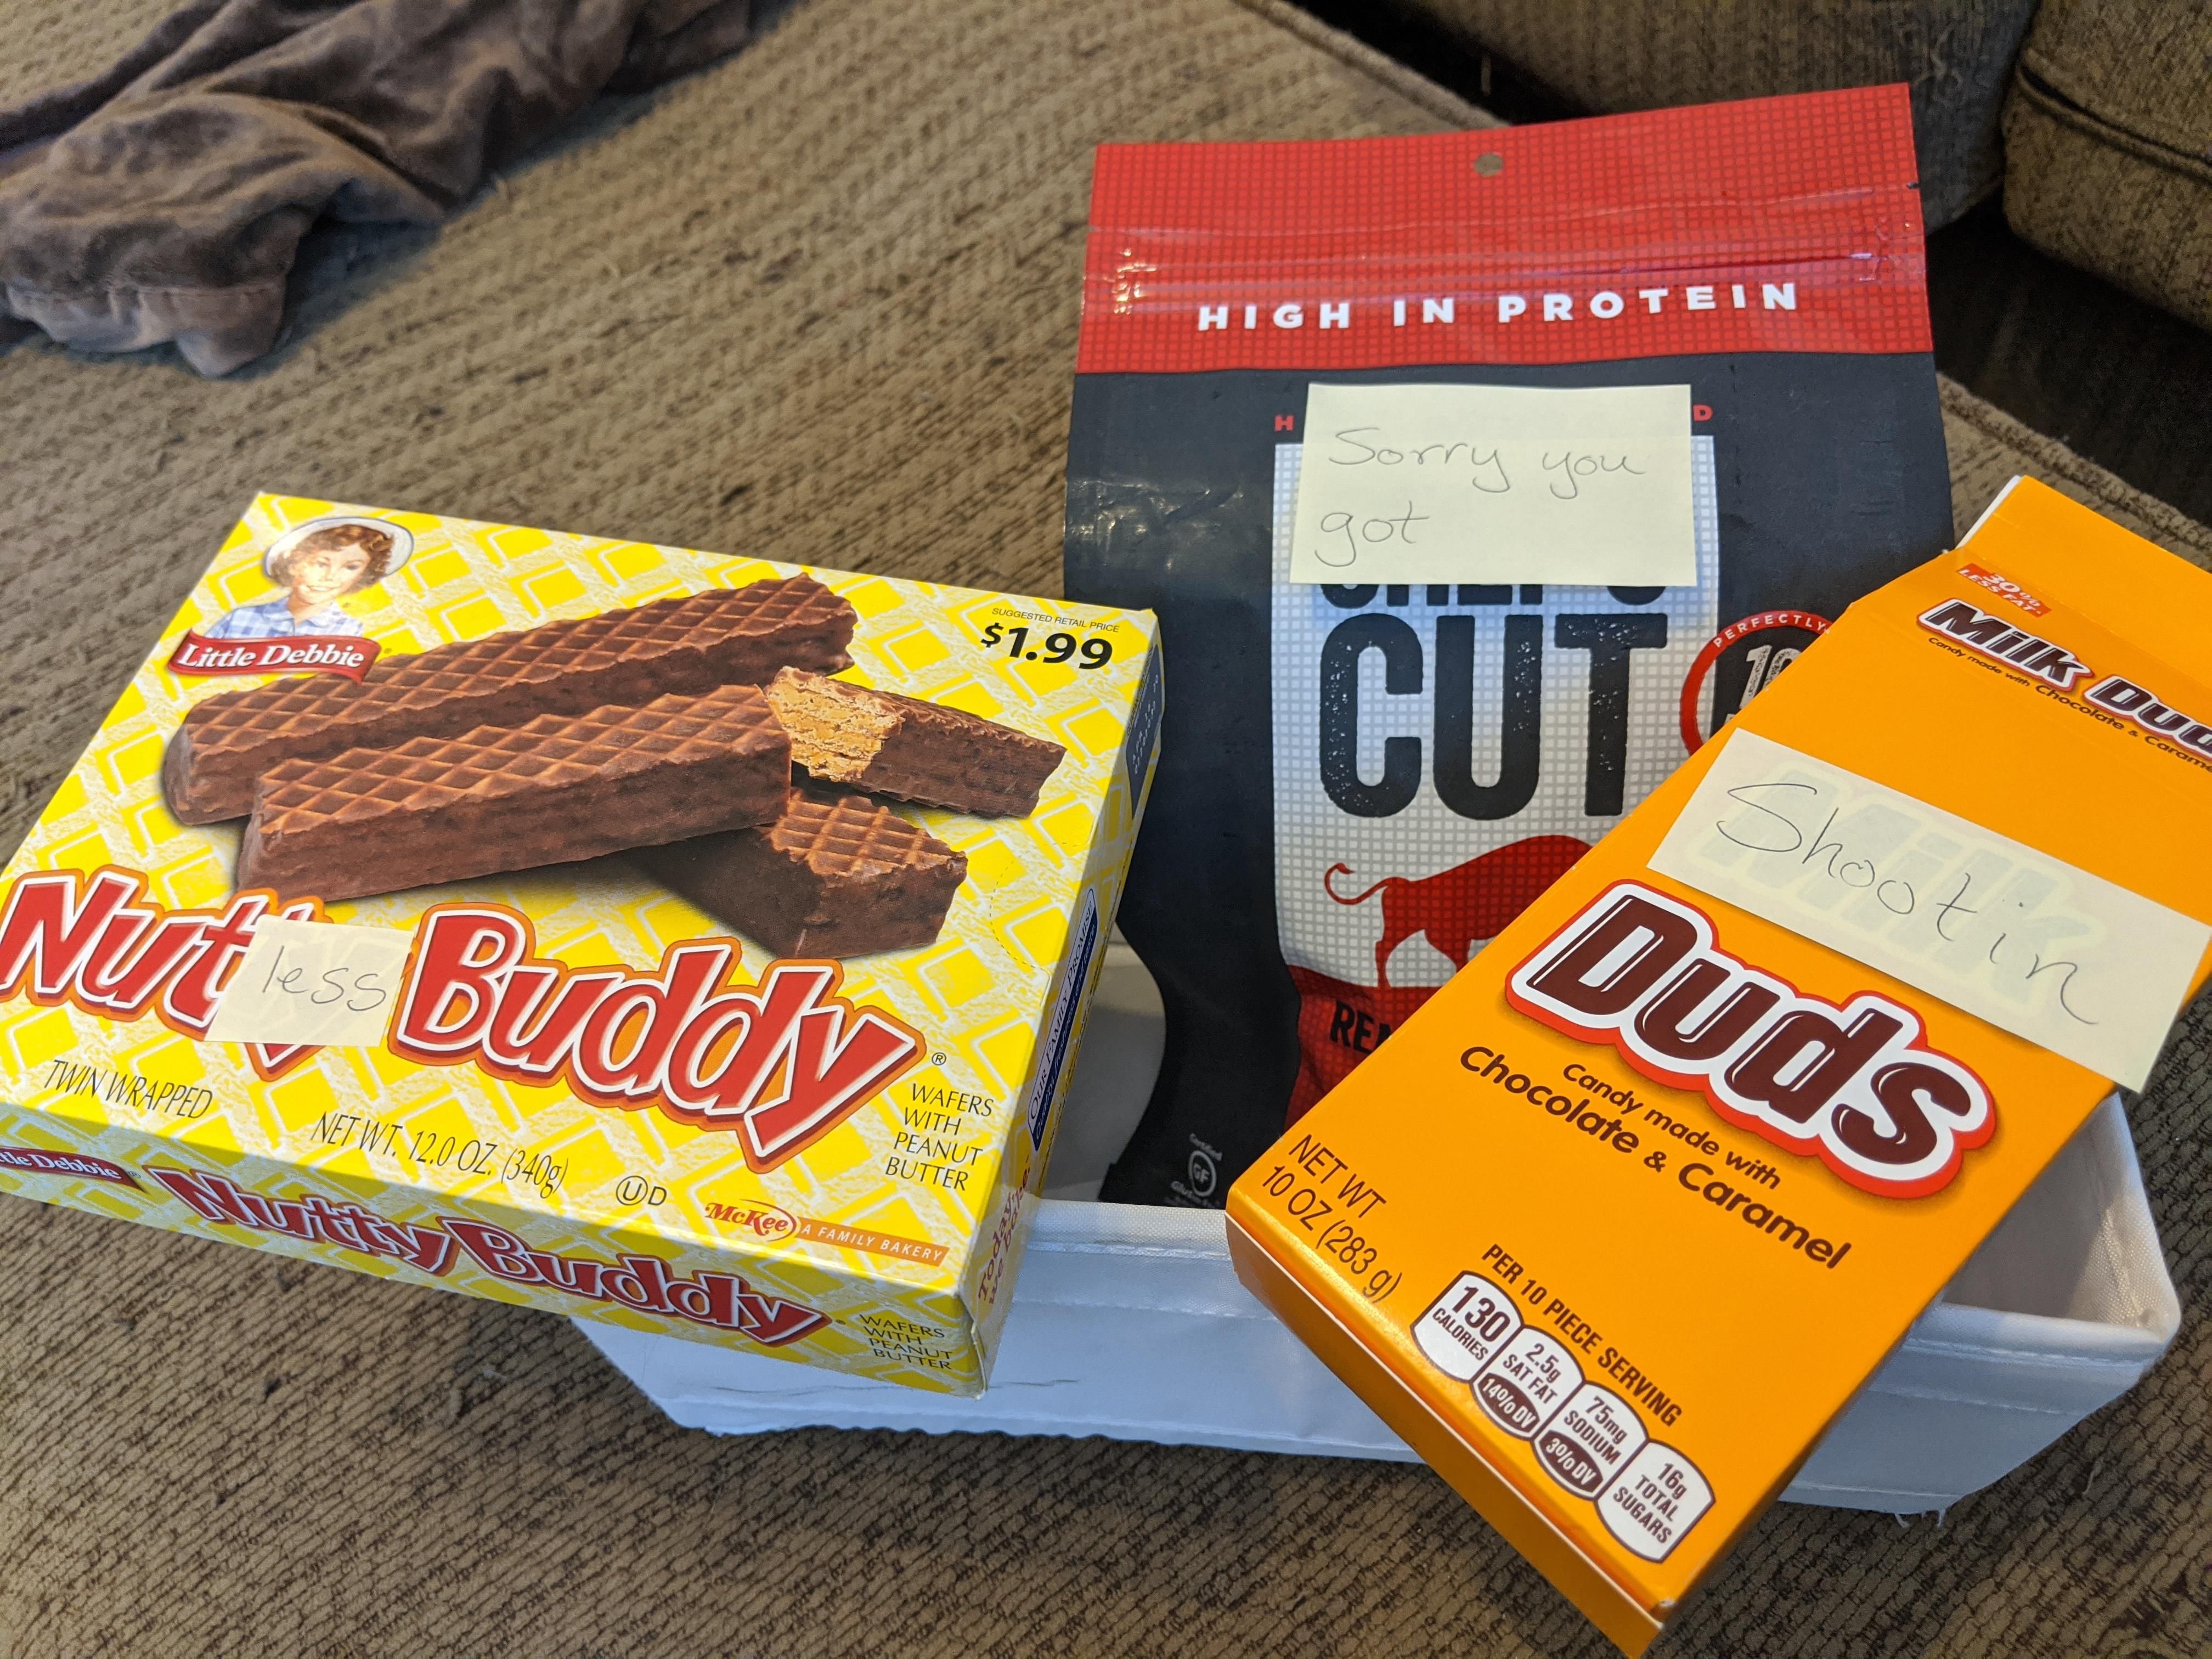 My wife gave me a care package after my vasectomy.